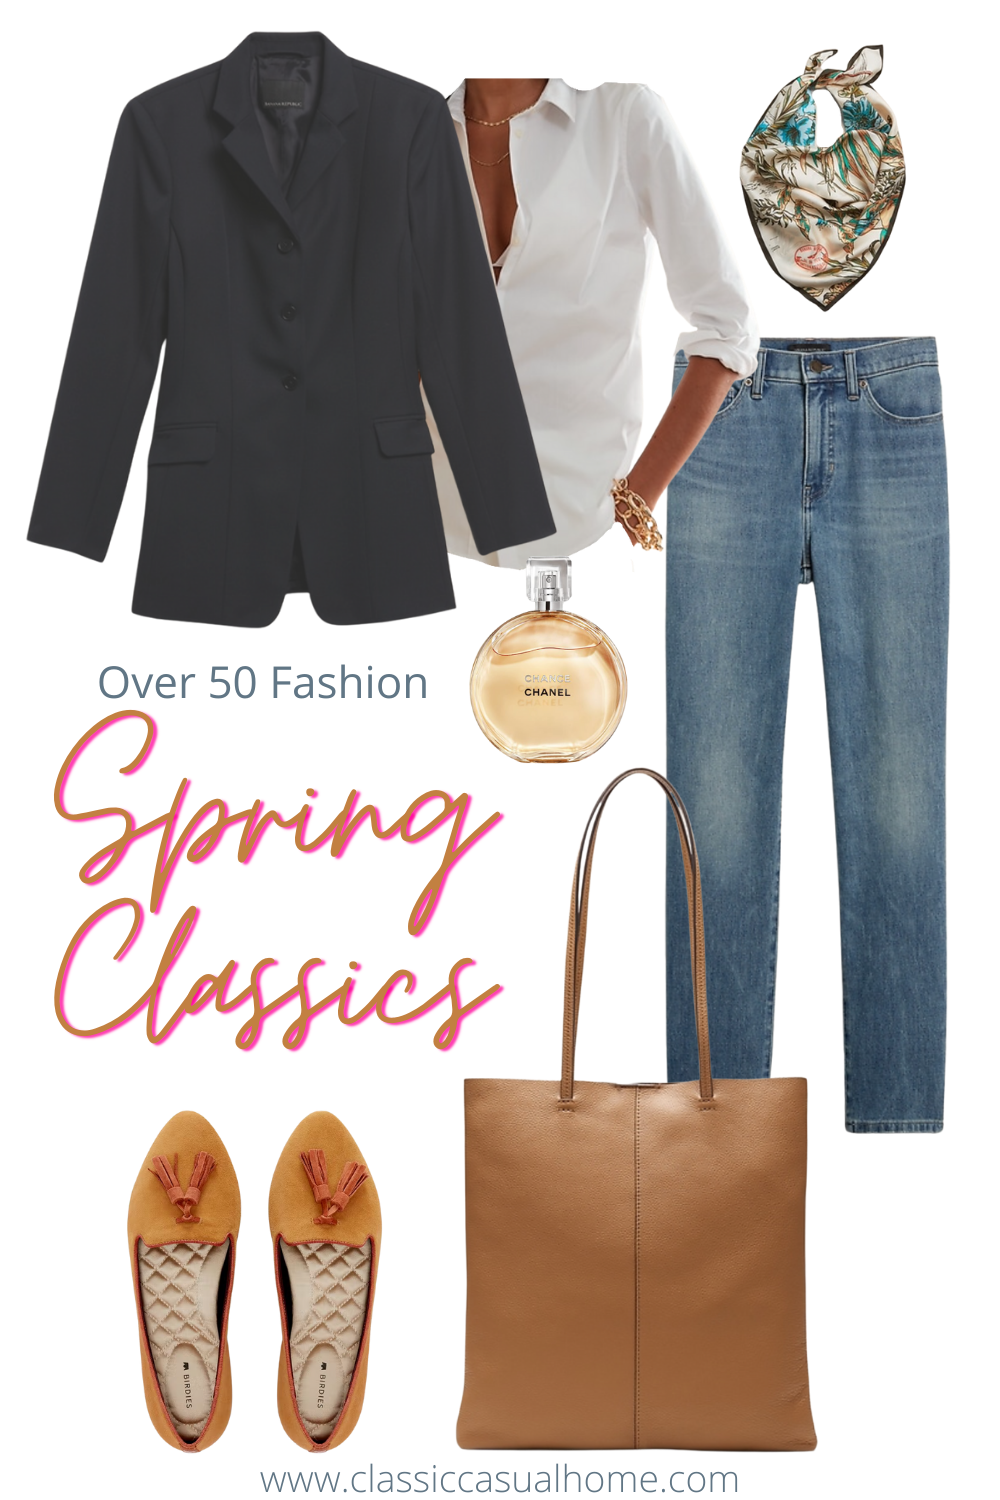 Classic Casual Spring Wear from Banana Republic on sale